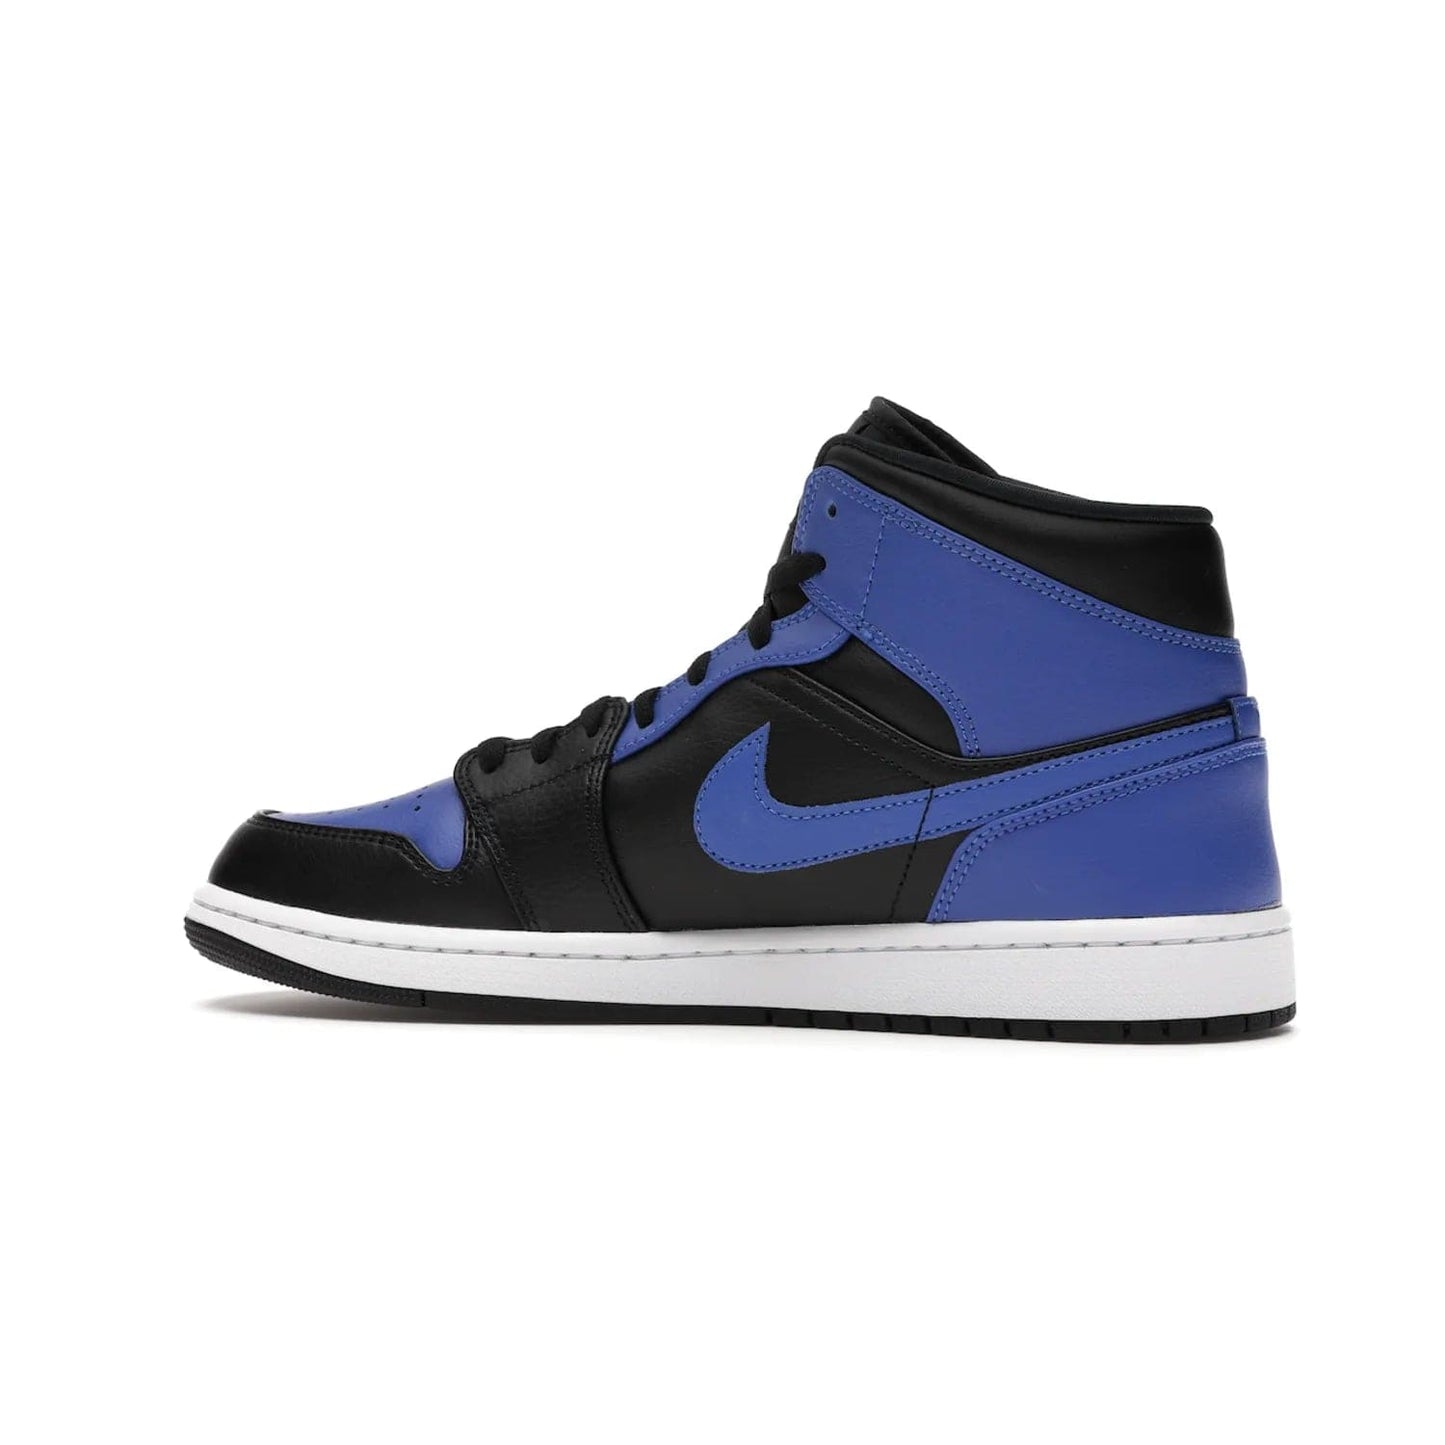 Jordan 1 Mid Hyper Royal Tumbled Leather - Image 21 - Only at www.BallersClubKickz.com - Iconic colorway of the Air Jordan 1 Mid Black Royal Tumbled Leather. Features a black tumbled leather upper, royal blue leather overlays, white midsole & black rubber outsole. Released December 2020. Adds premium style to any collection.